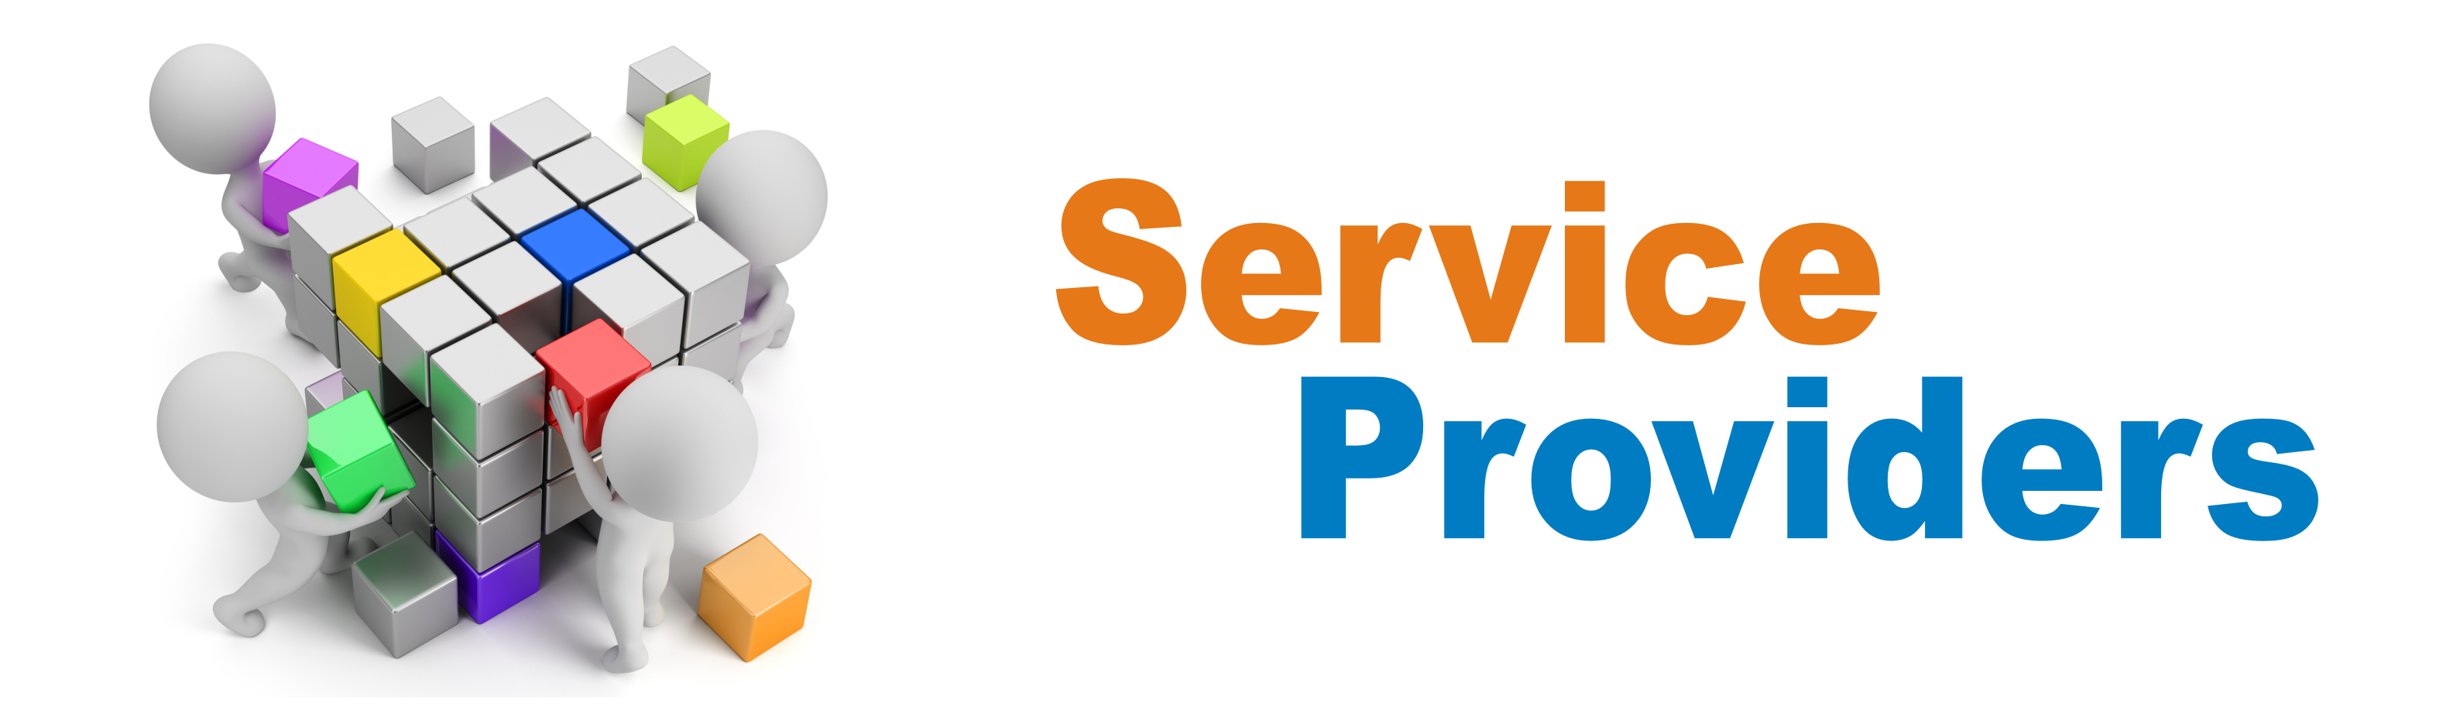 articles about service providers